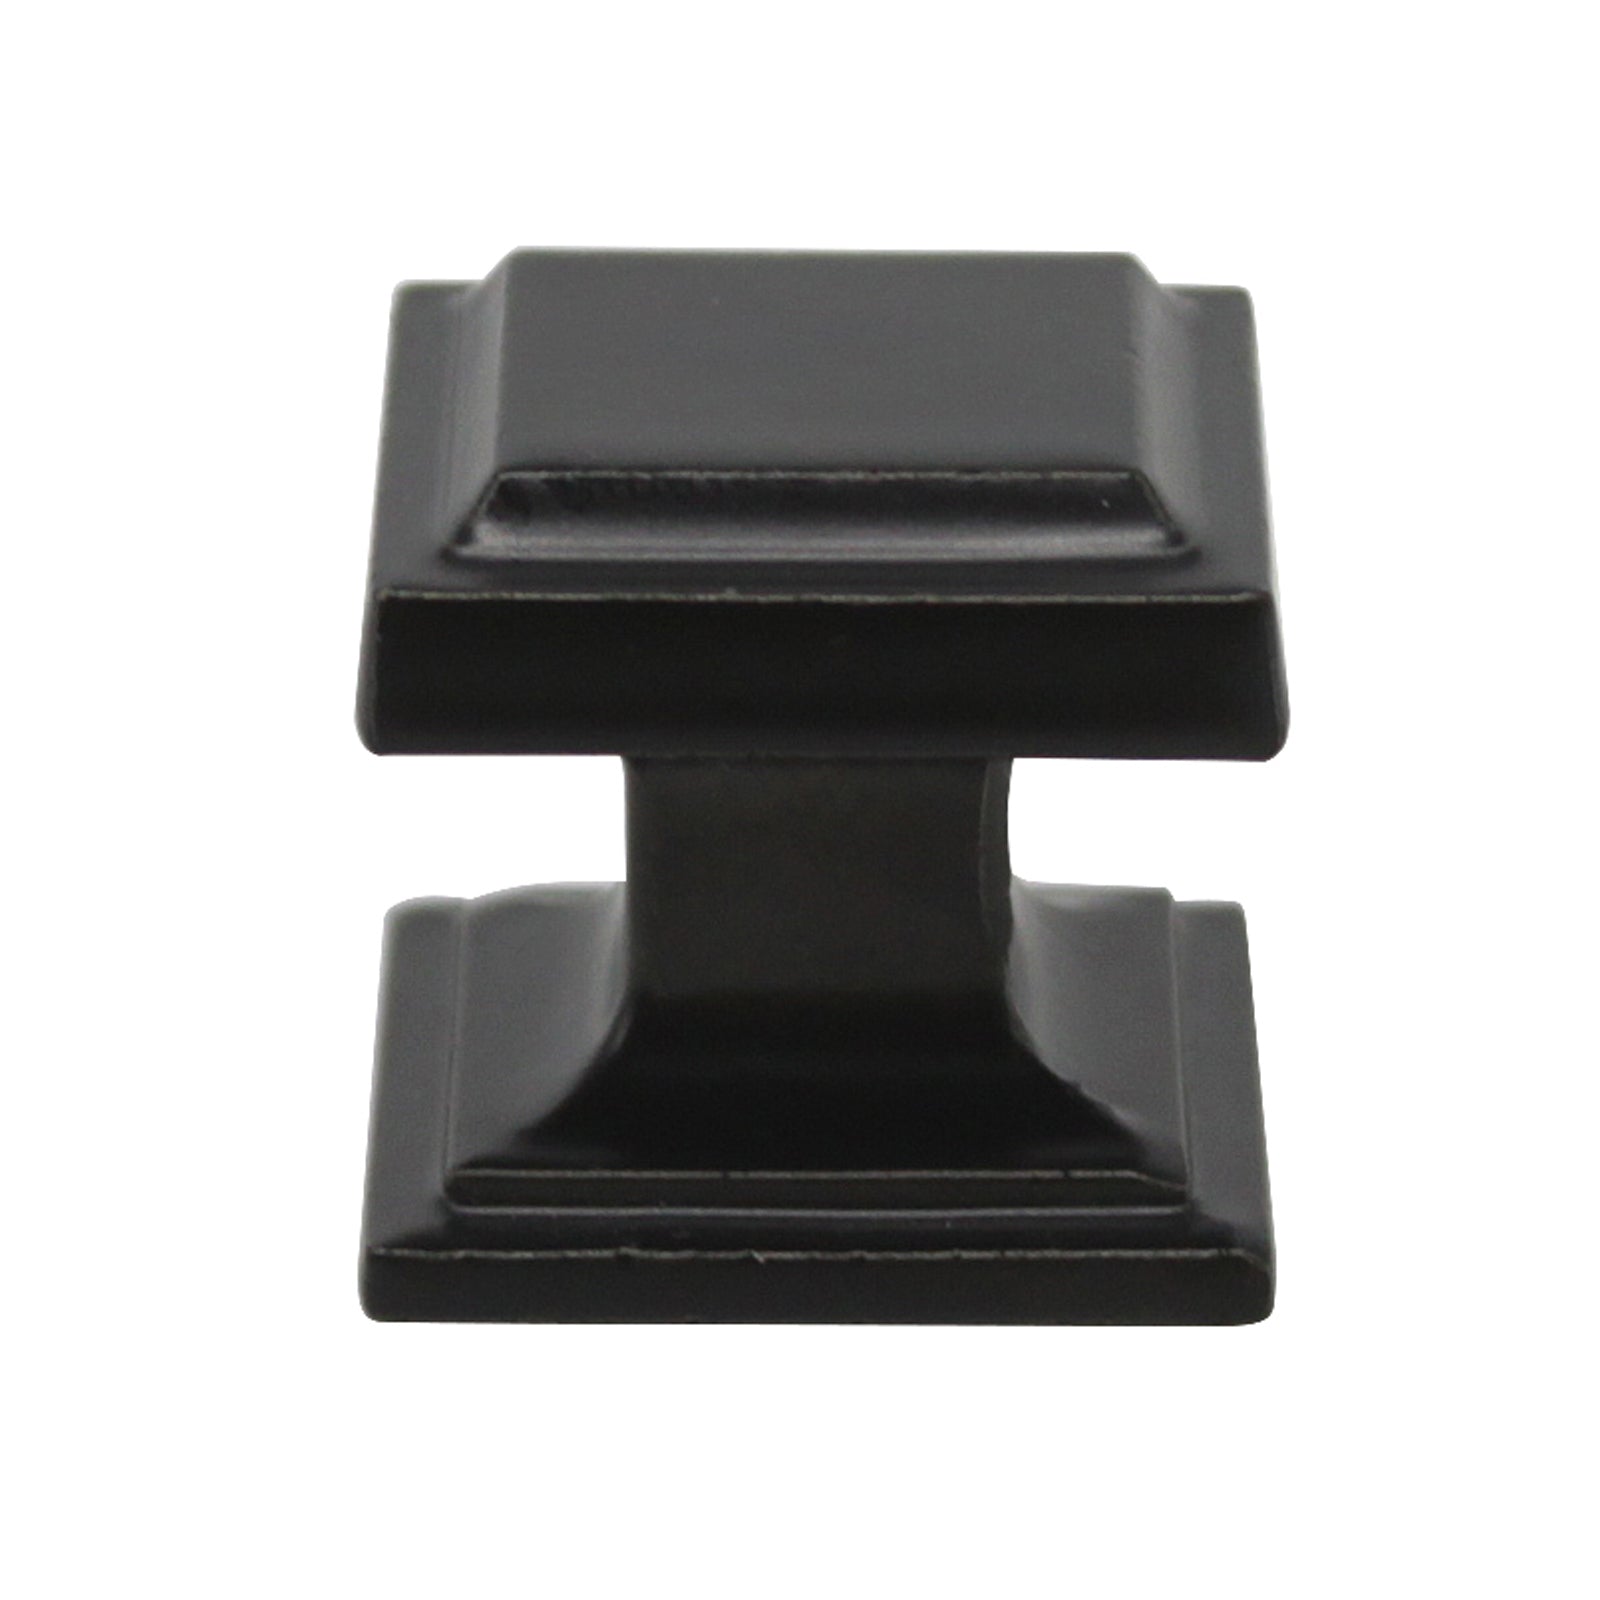 25mm 1inch Square Cabinet Knobs in Oil Rubbed Bronze / Black PS7110